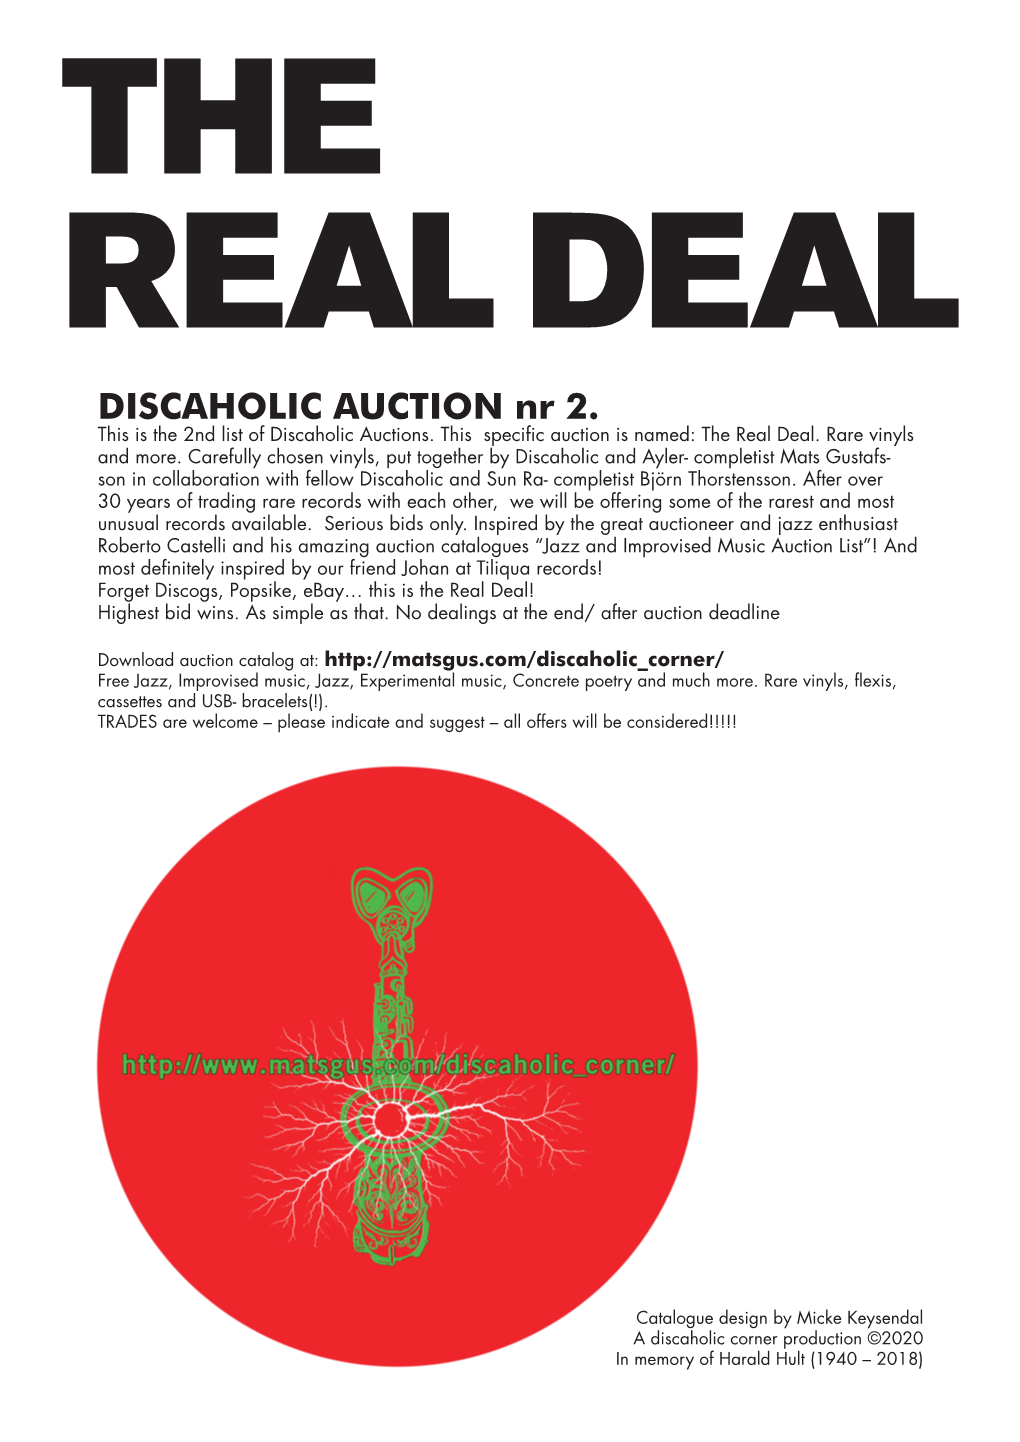 DISCAHOLIC AUCTION Nr 2. This Is the 2Nd List of Discaholic Auctions